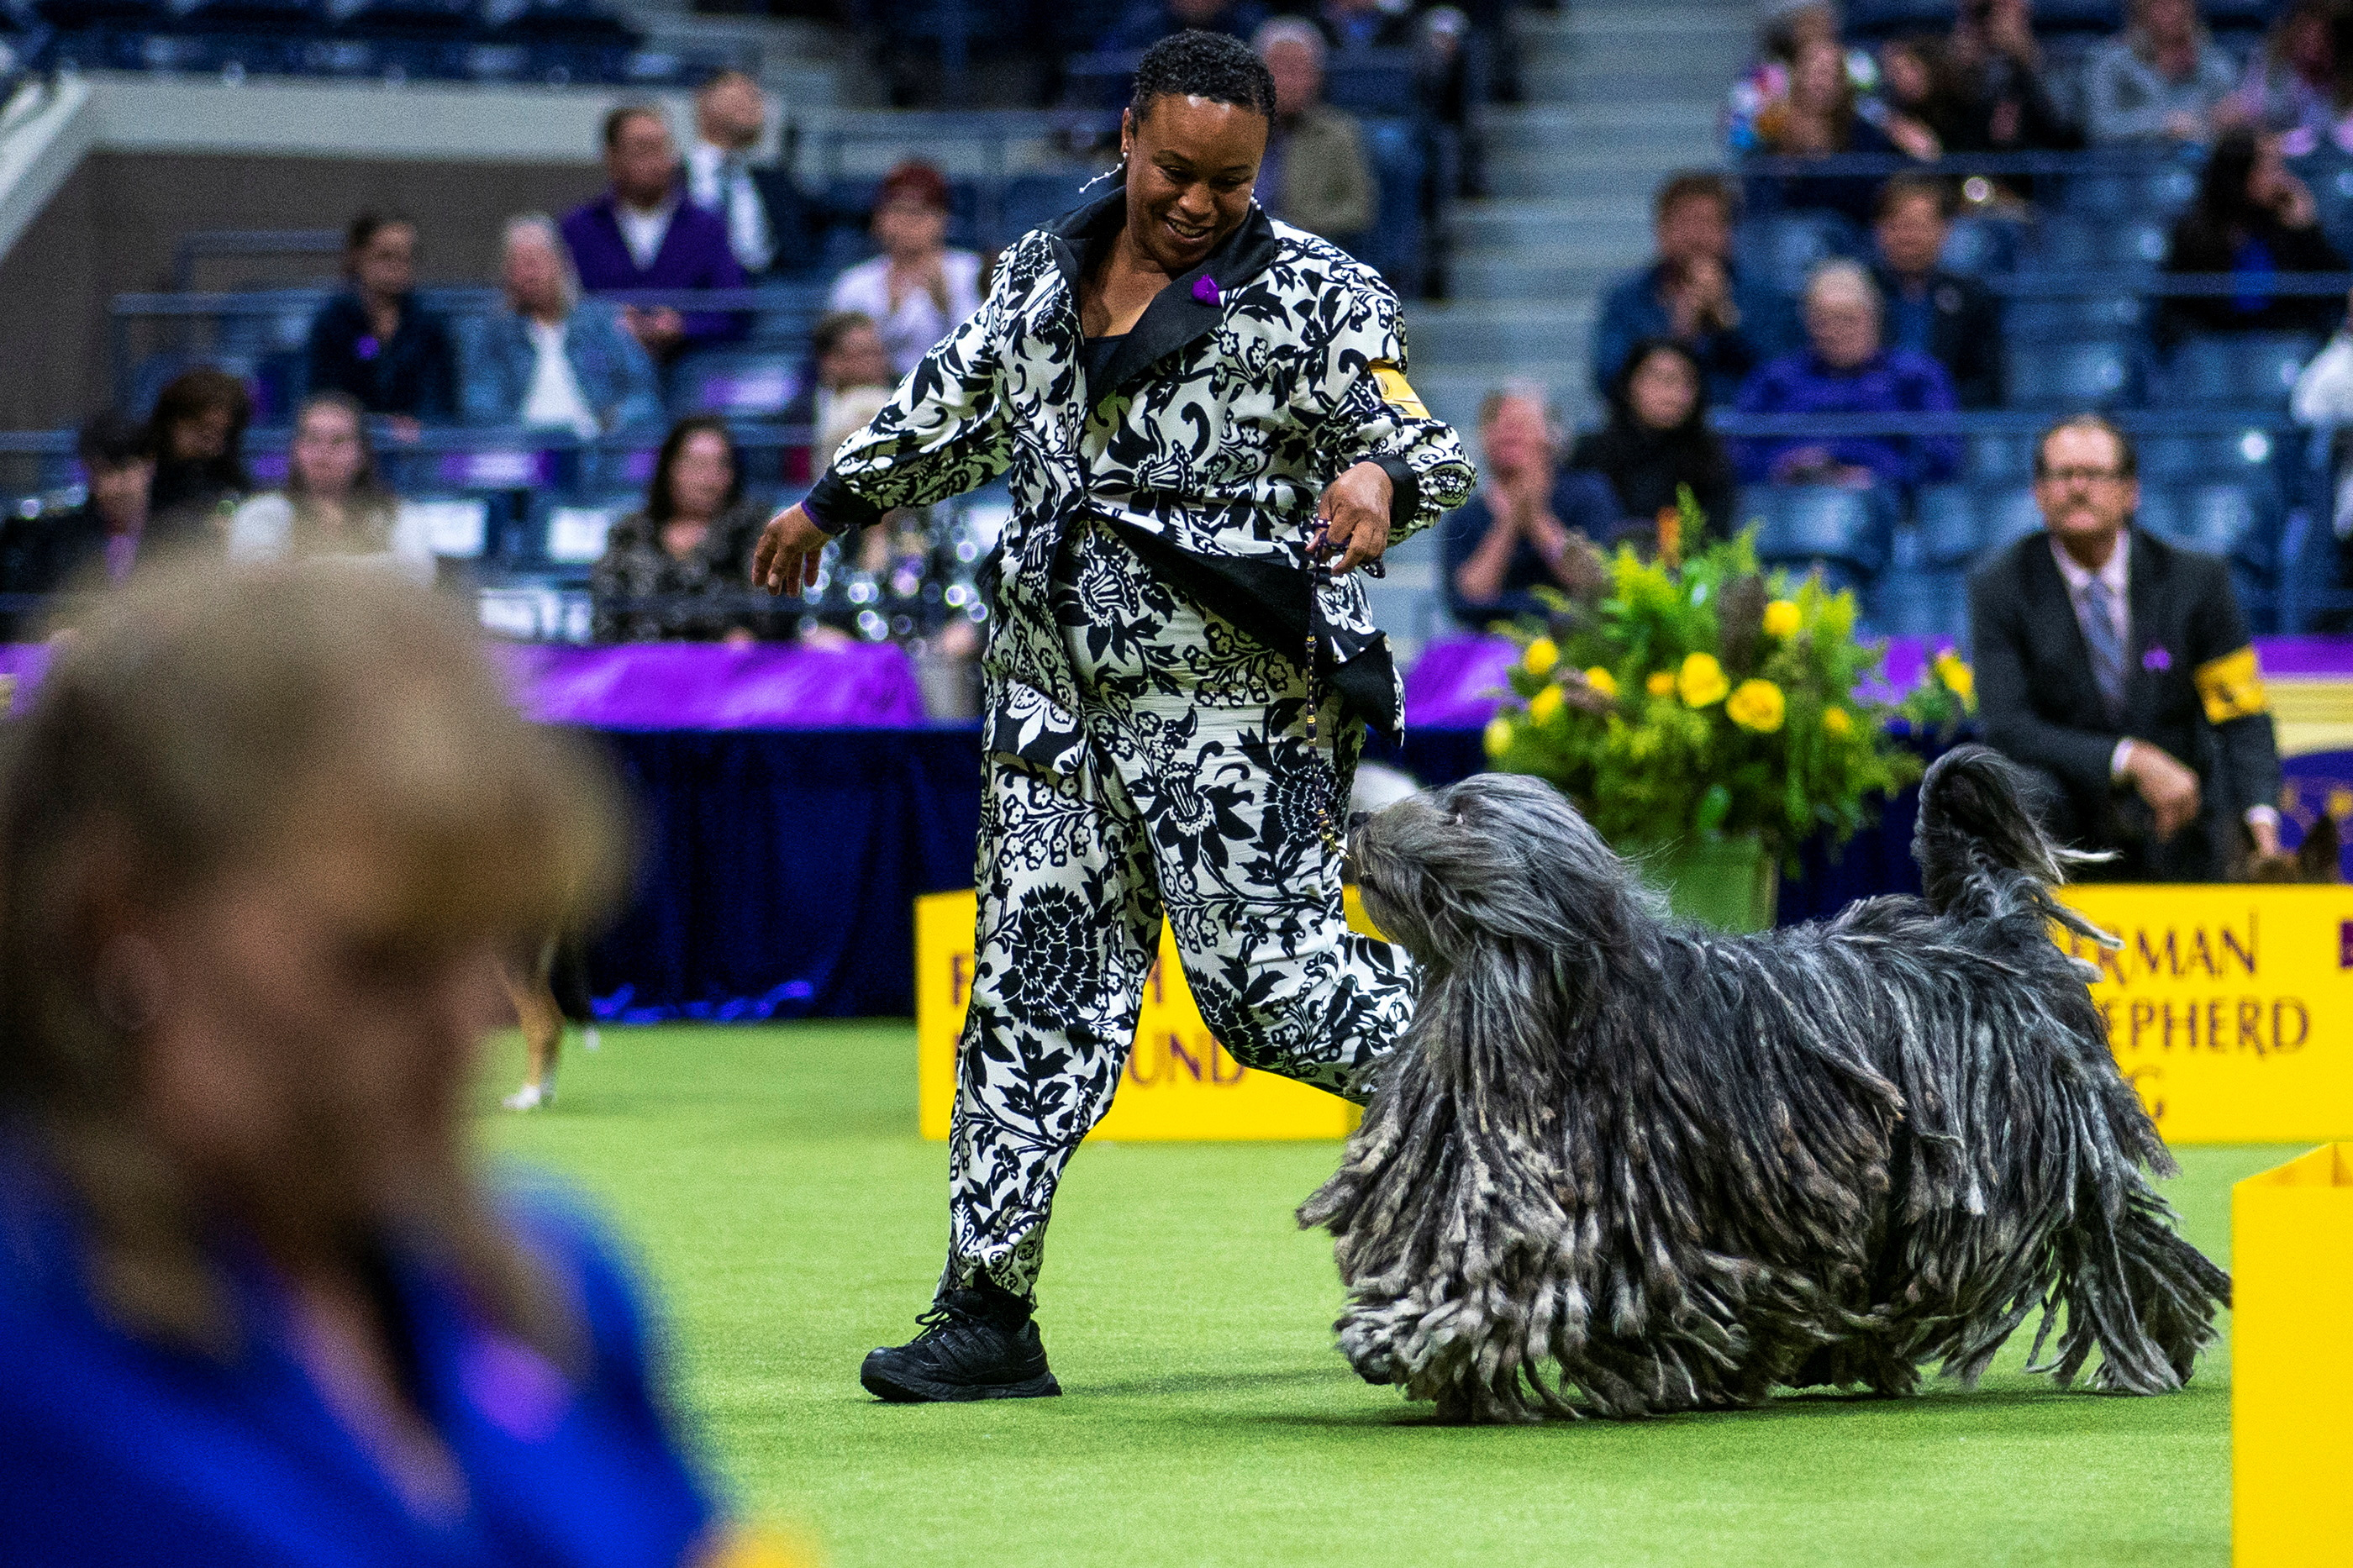 148th Westminster Kennel Club Dog Show in New York